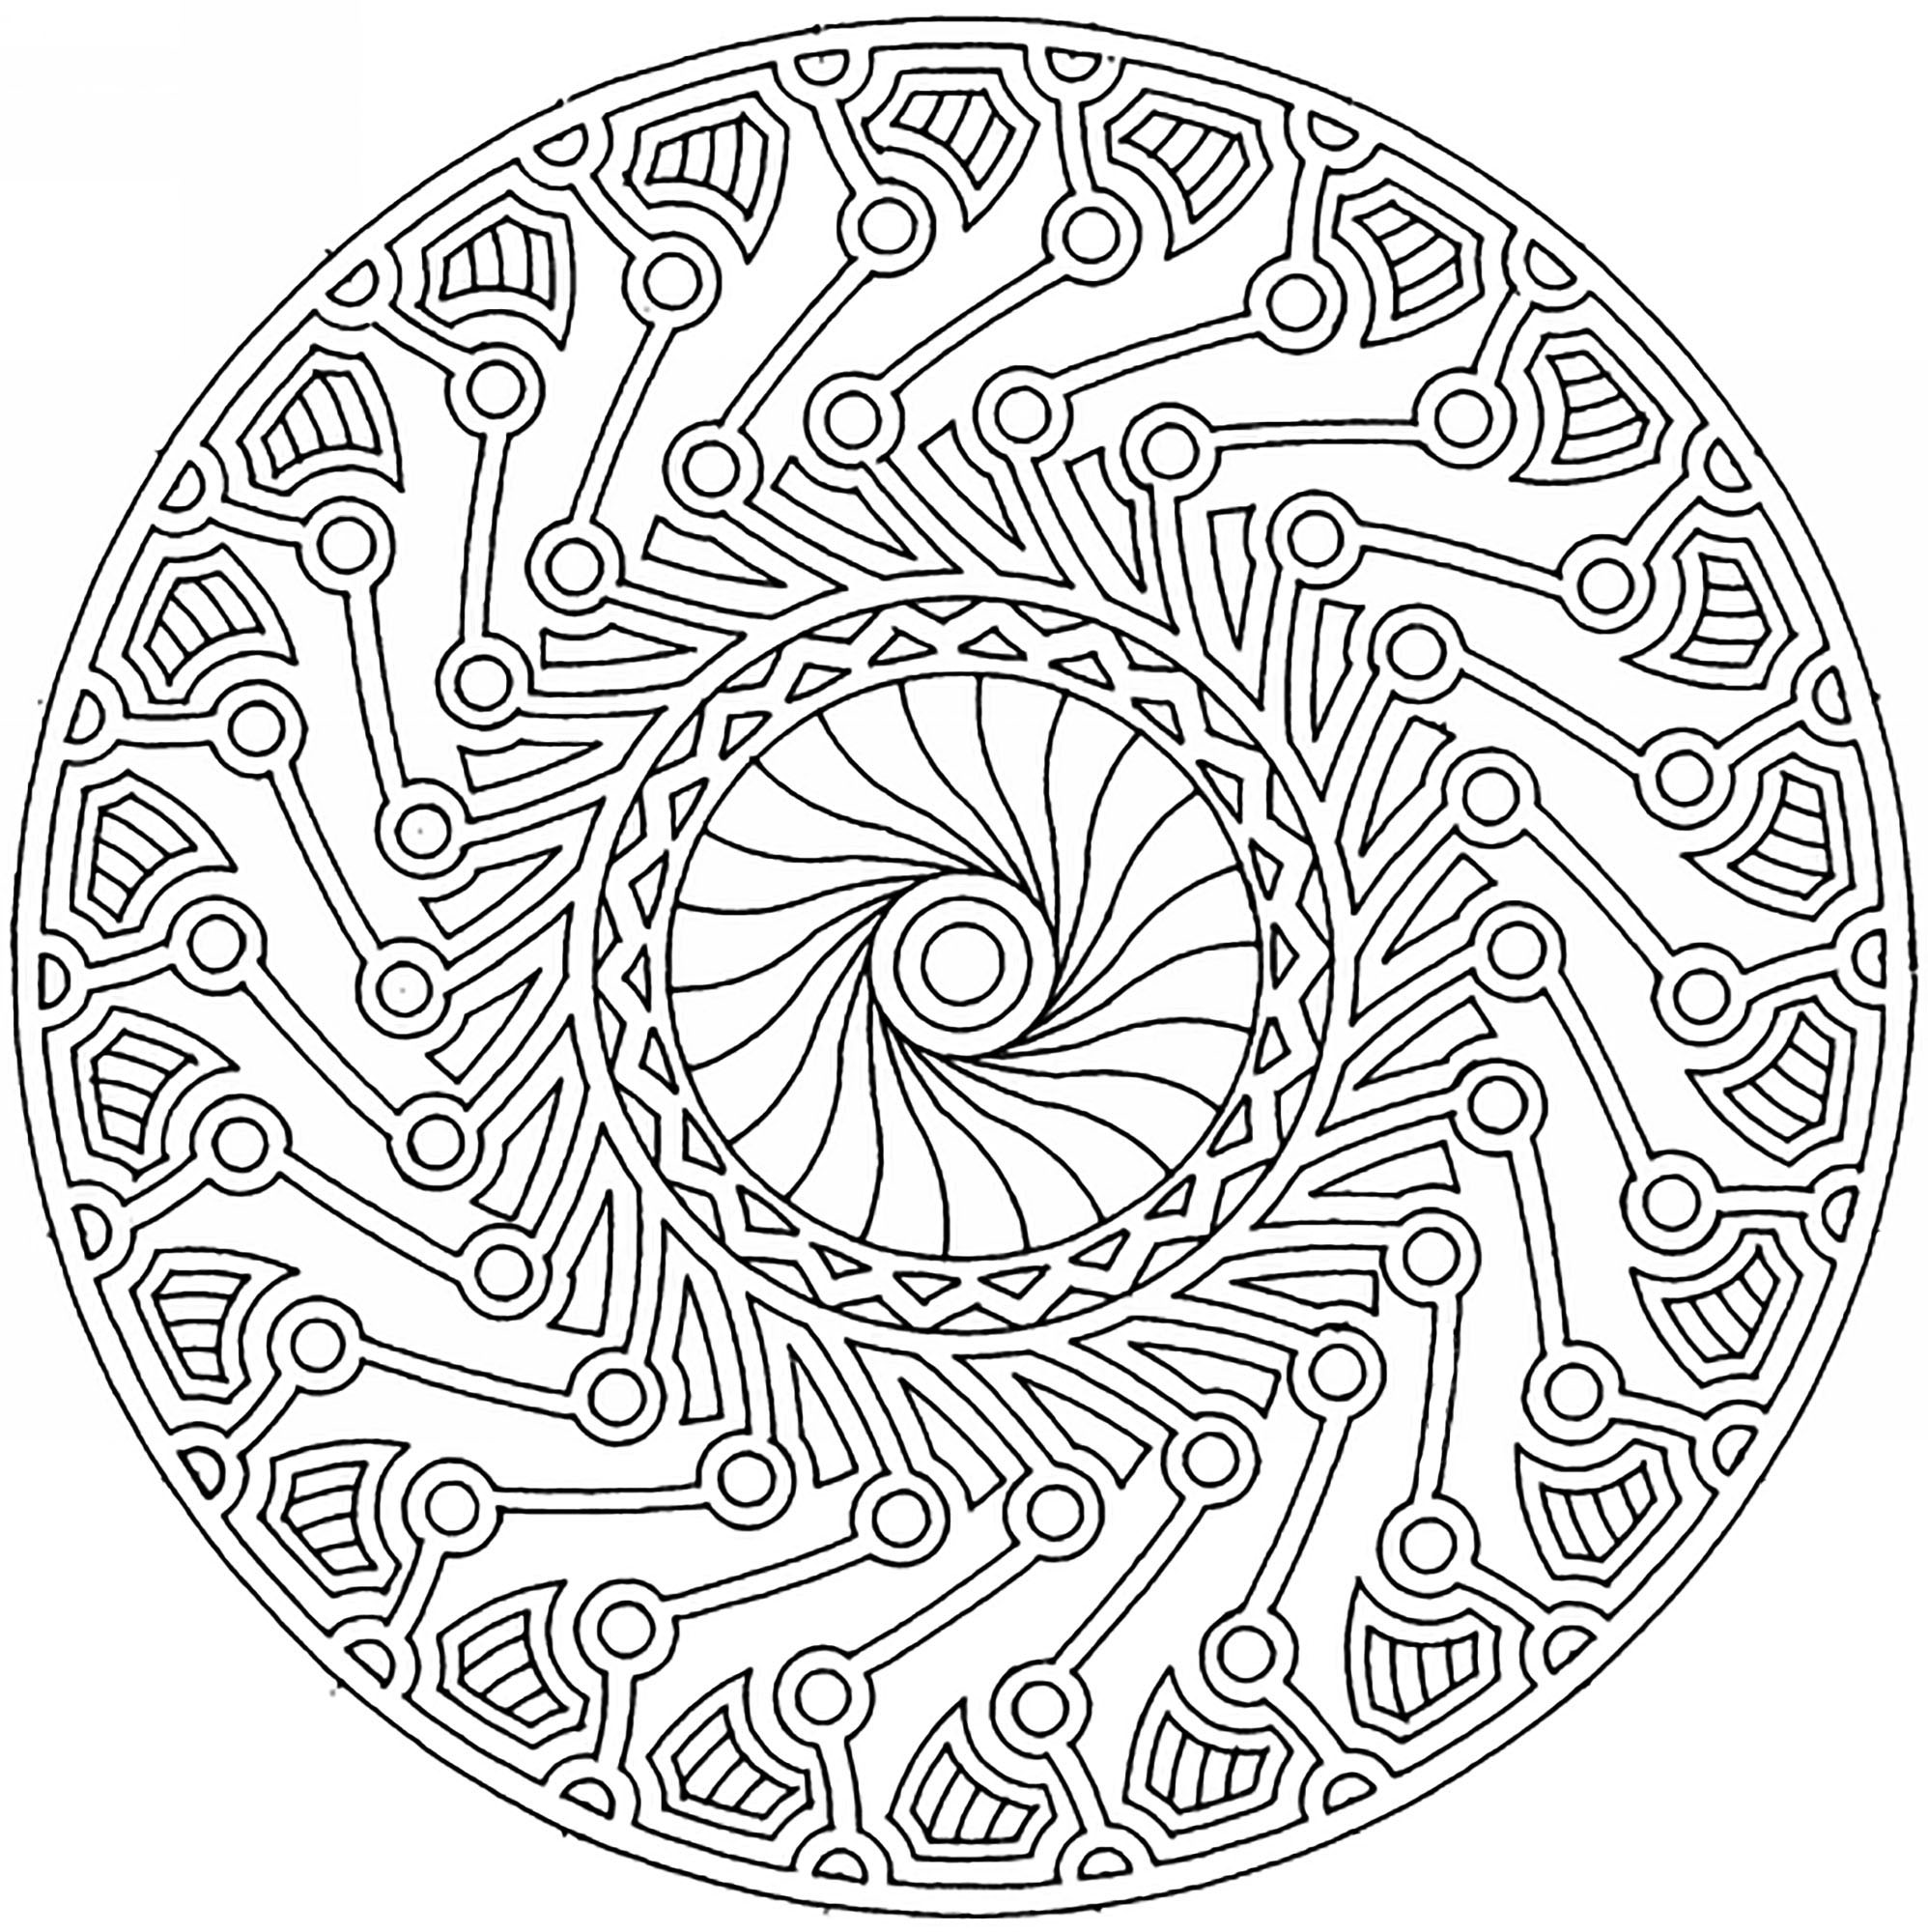 Mandala harmony and complexity   Difficult Mandalas for adults ...